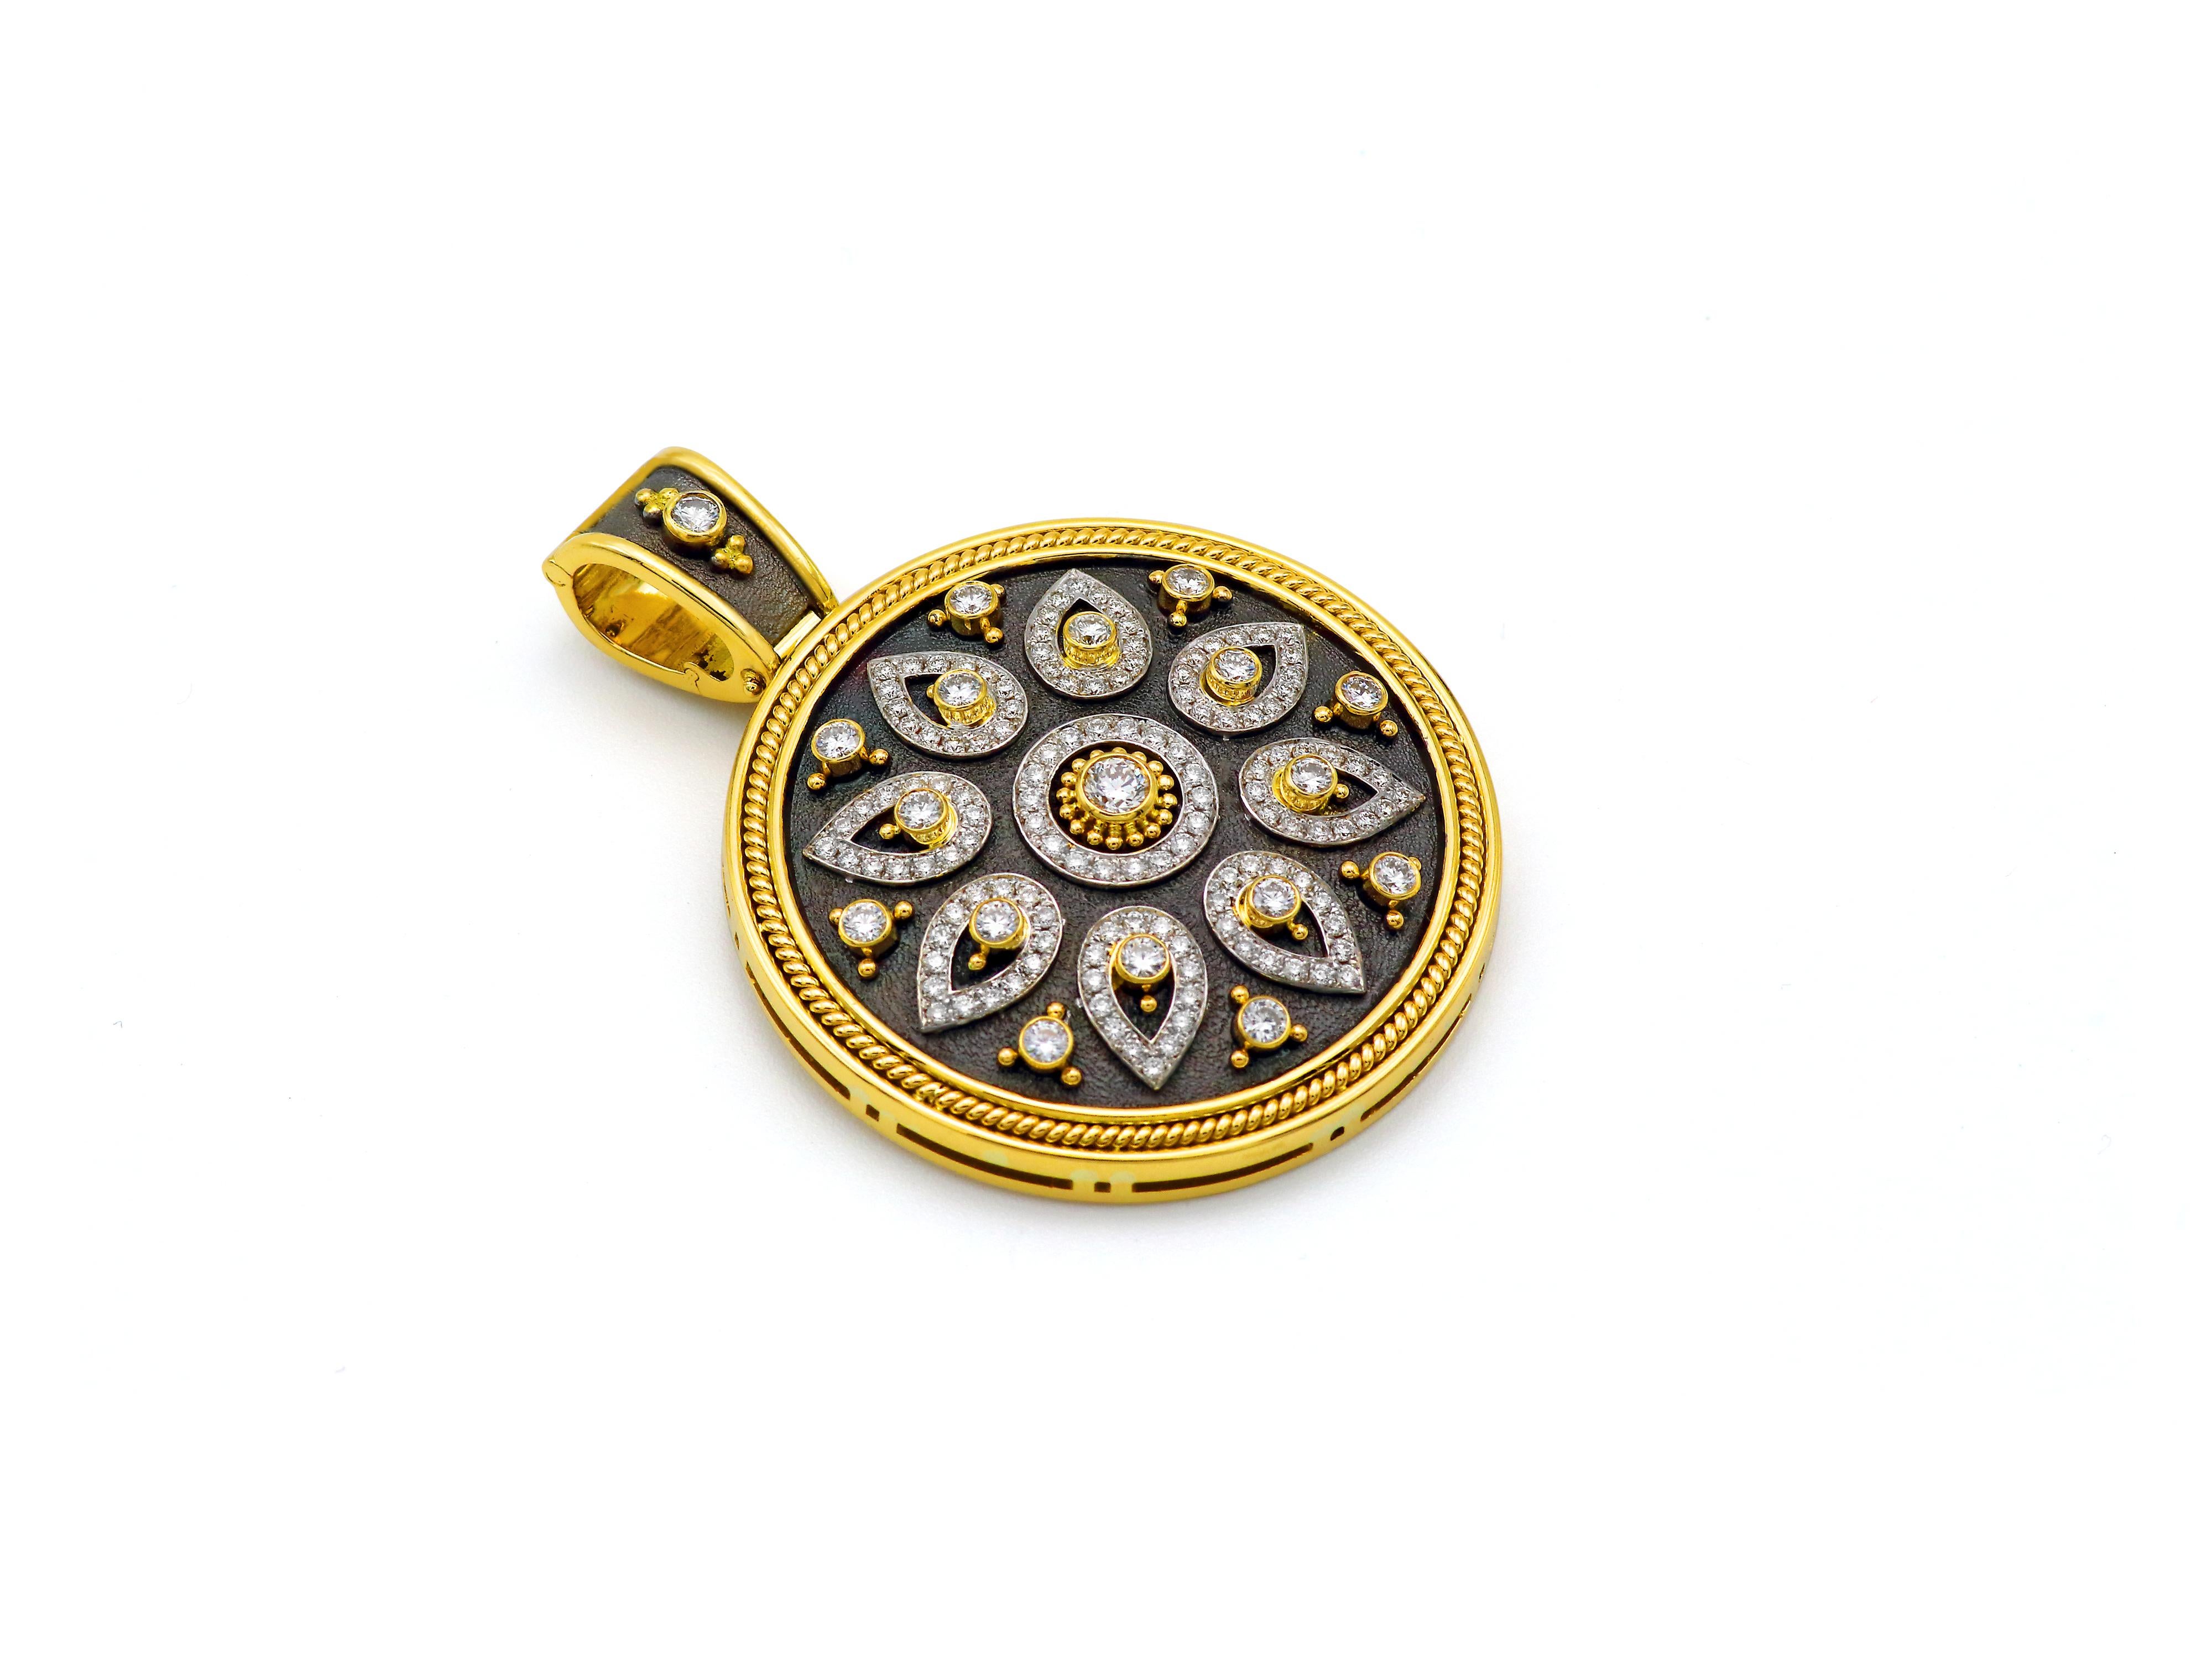 18 karats white and yellow gold pendant of the Noir collection in a dramatic size and impeccable workmanship, set with 1.72 carats selected extra white diamonds and our heavy 18k gold work. Our exclusive opening bezel allows you to have a million